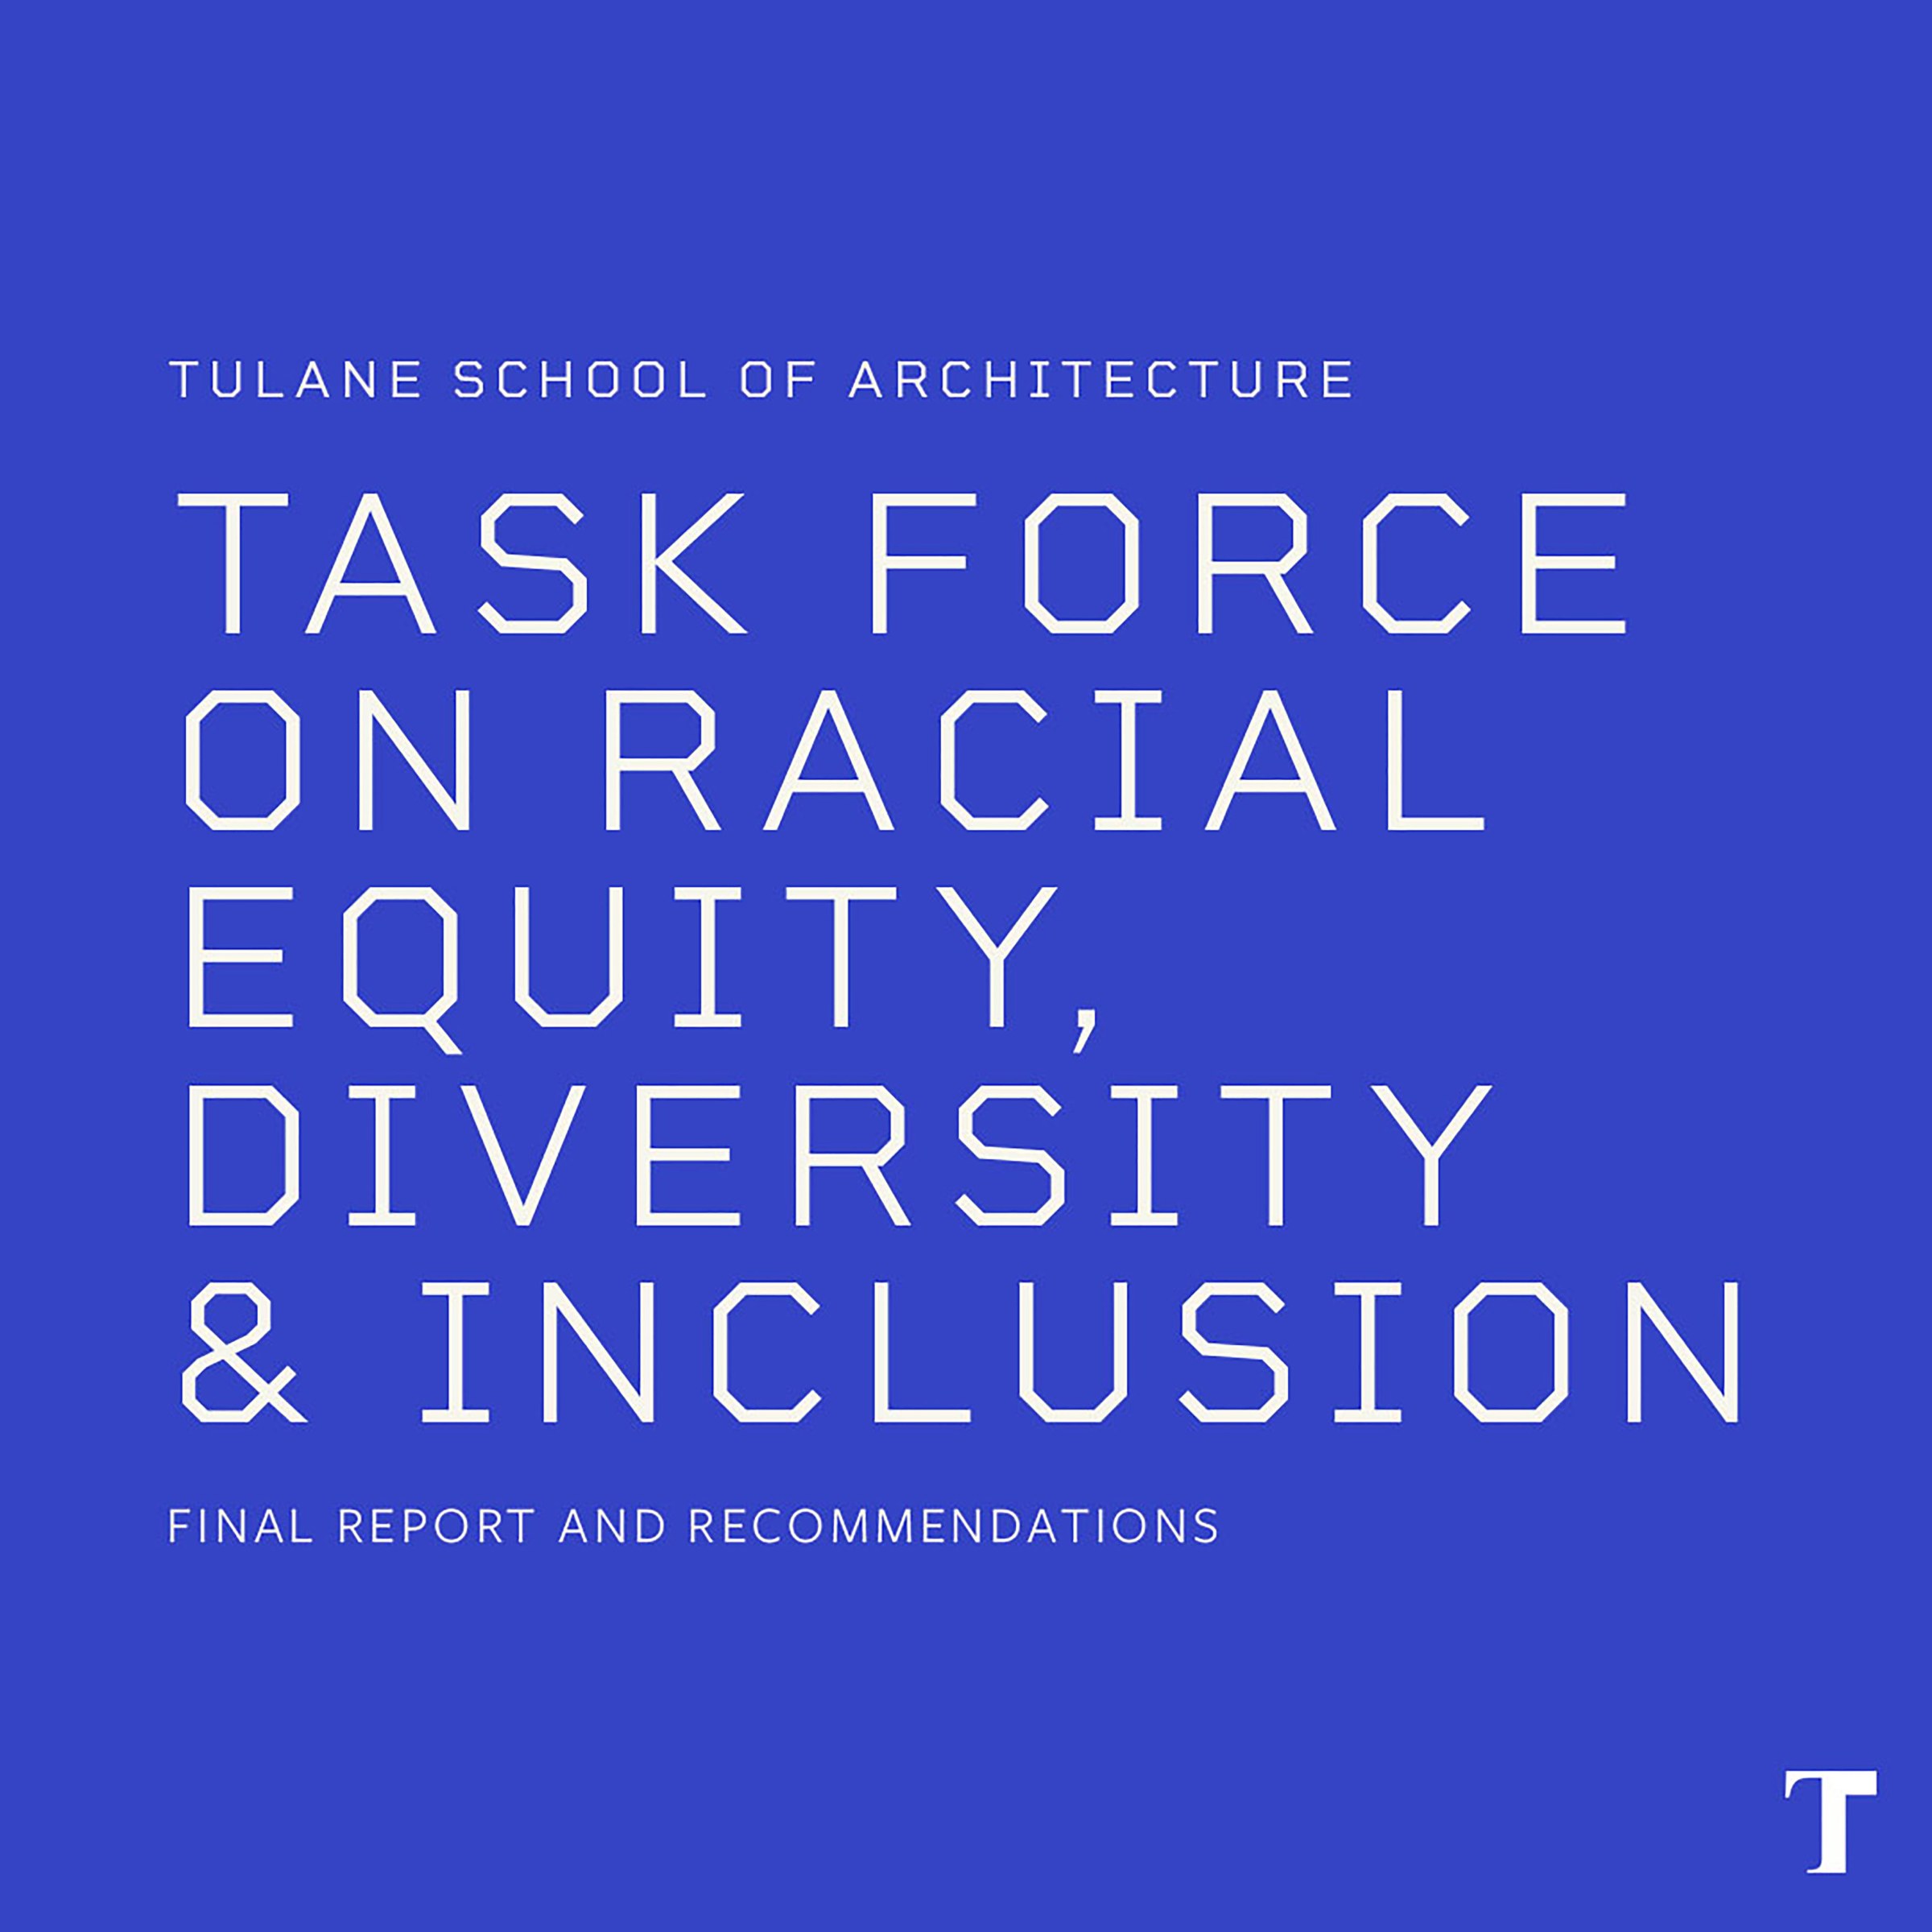 The TuSA Task Force on Racial Diversity, Equity and Inclusion produces Final Report and Recommendations.